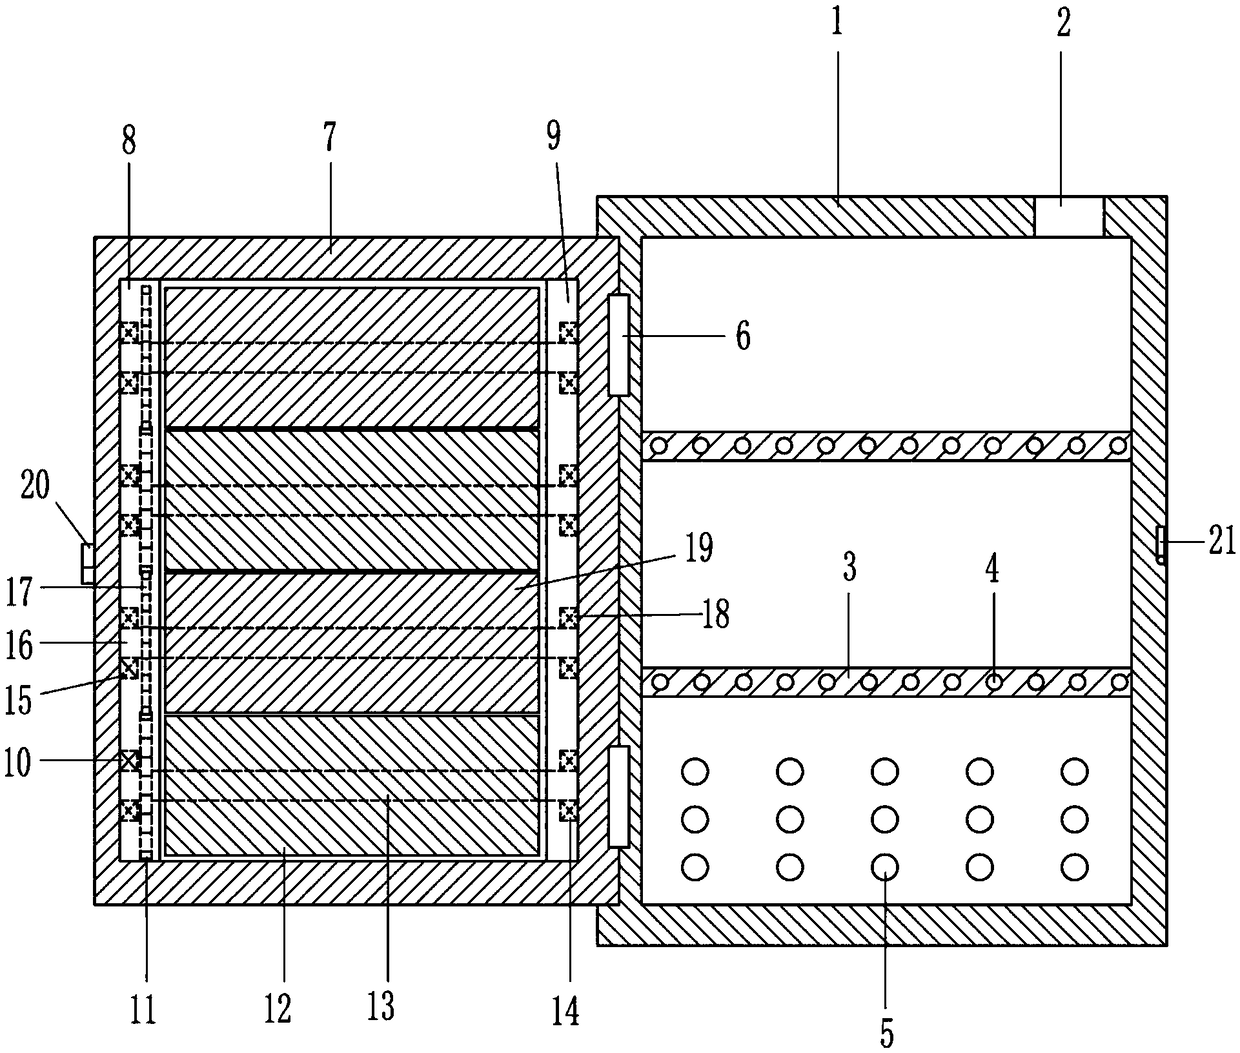 Heat-dissipating power distribution cabinet for electric equipment